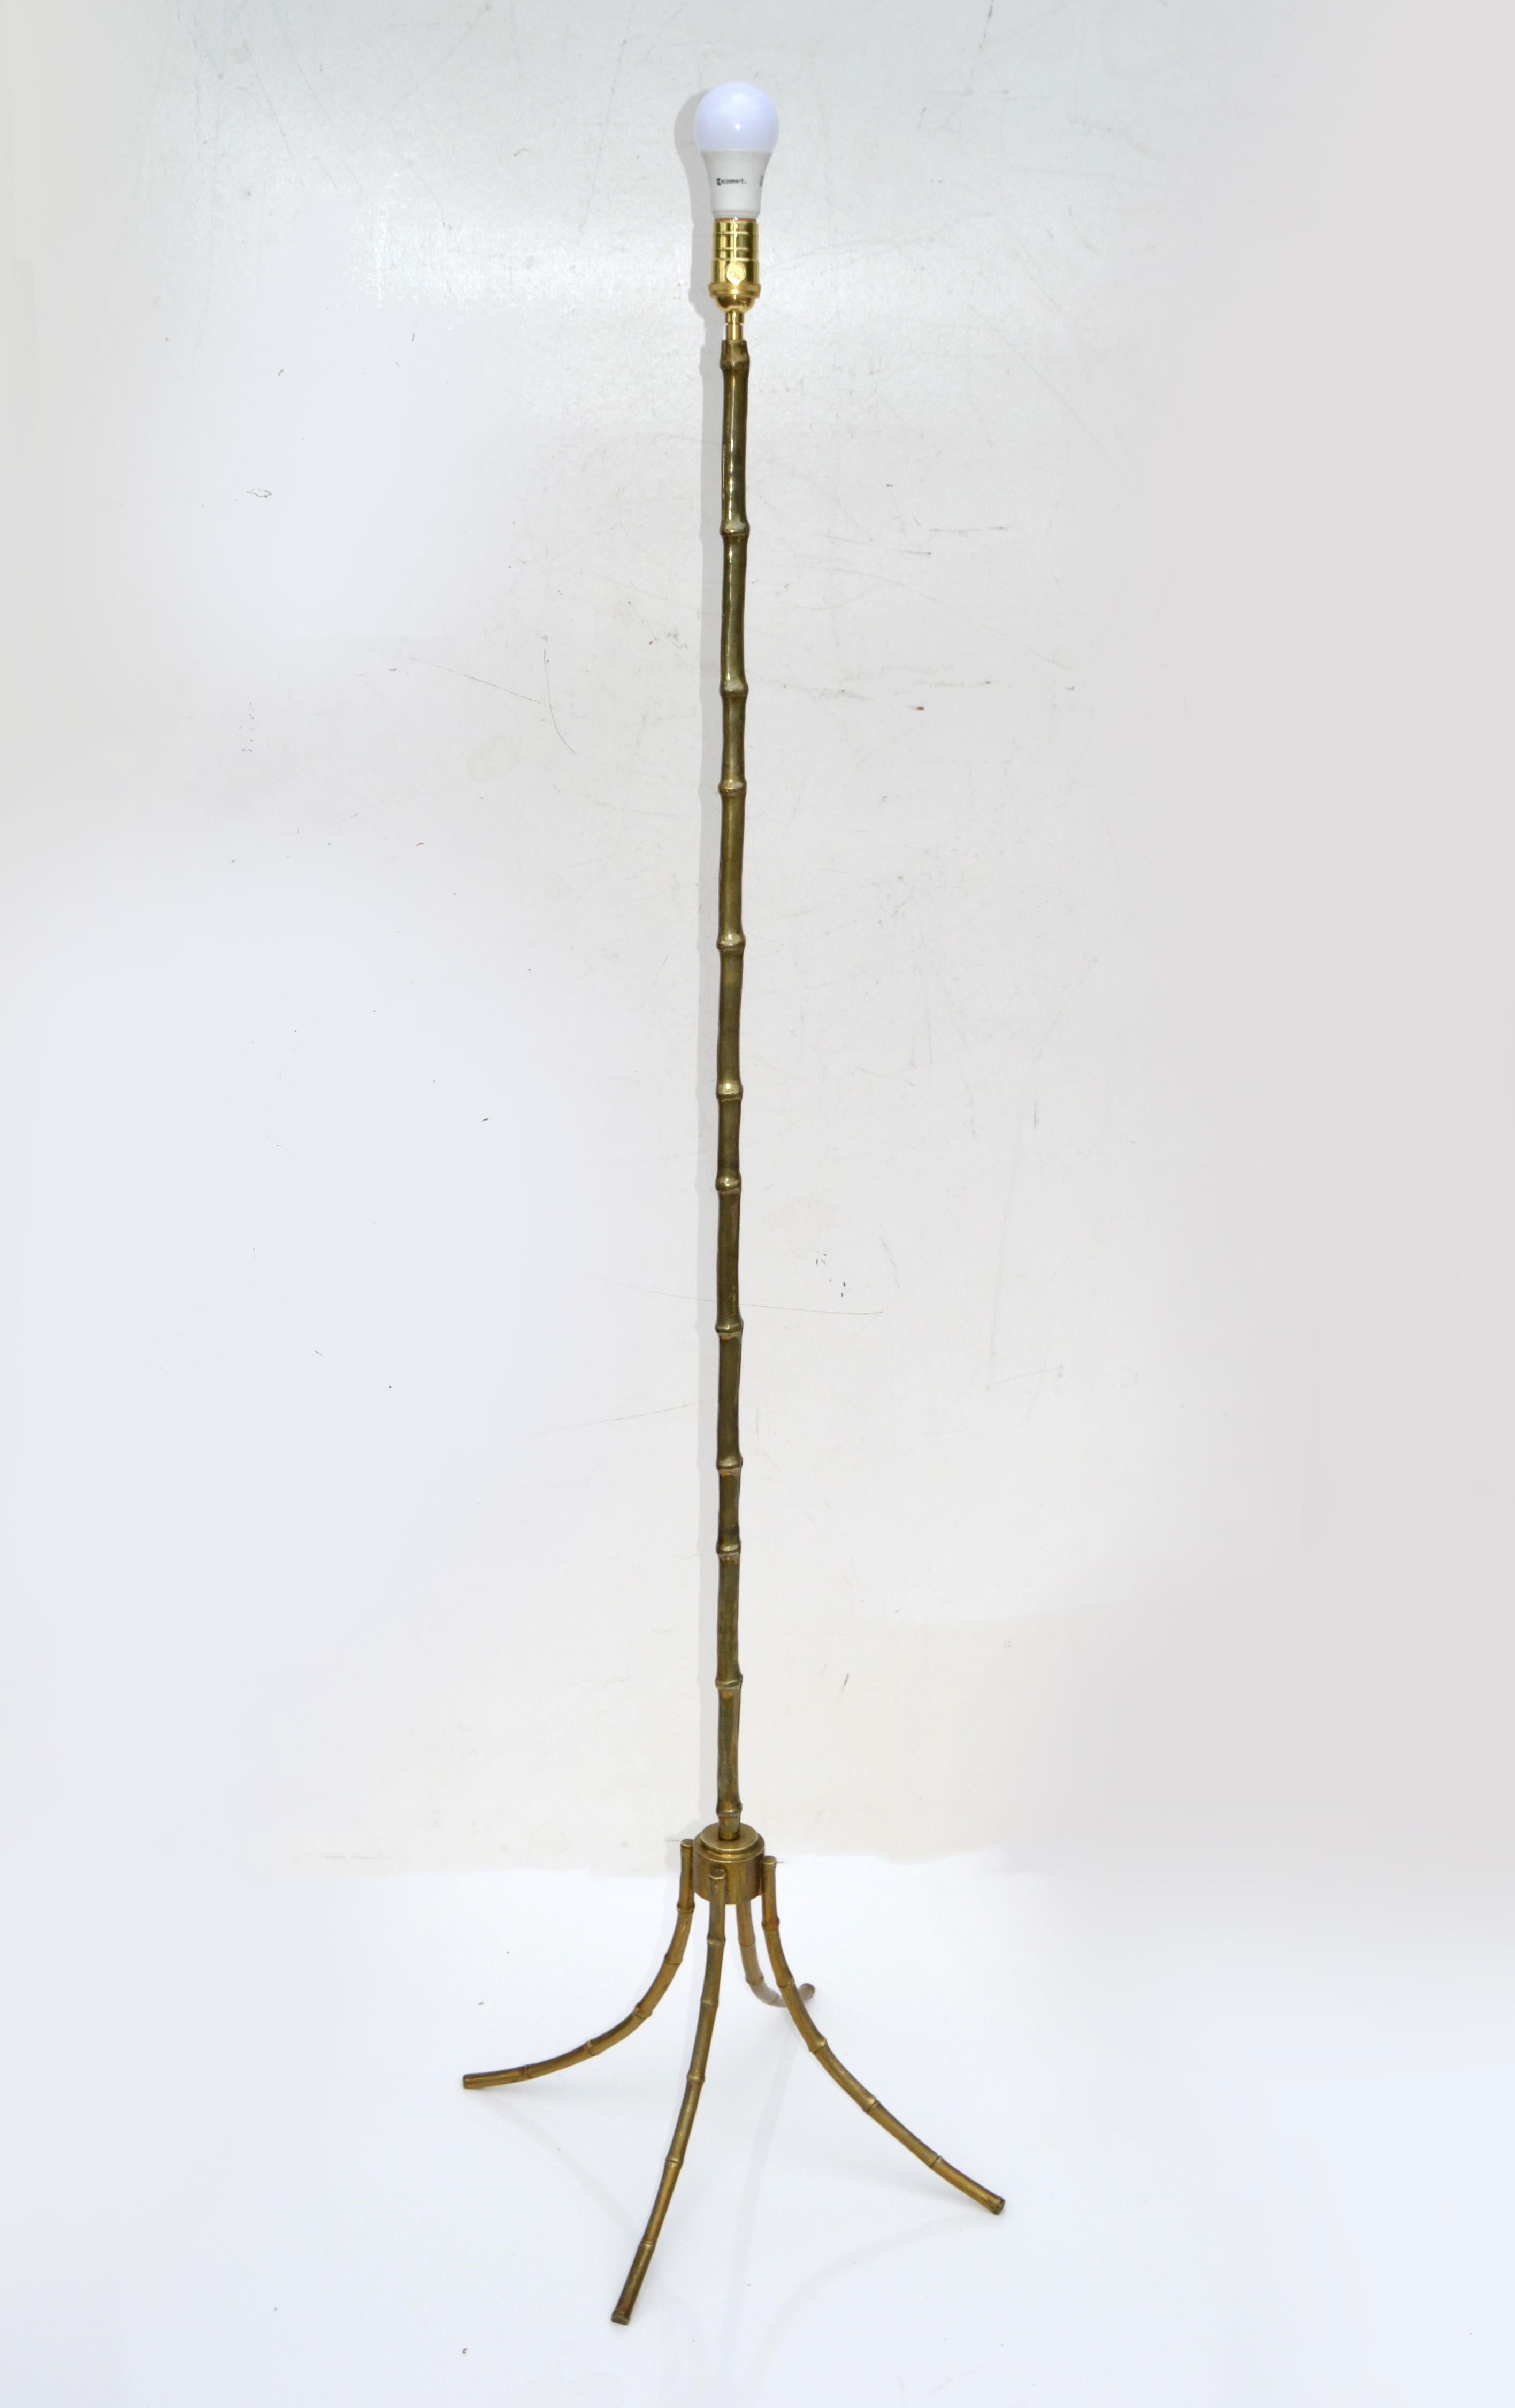 Hand-Crafted Maison Baguès Bronze Floor Lamp France Neoclassical Black & Gold Shade 1950 For Sale